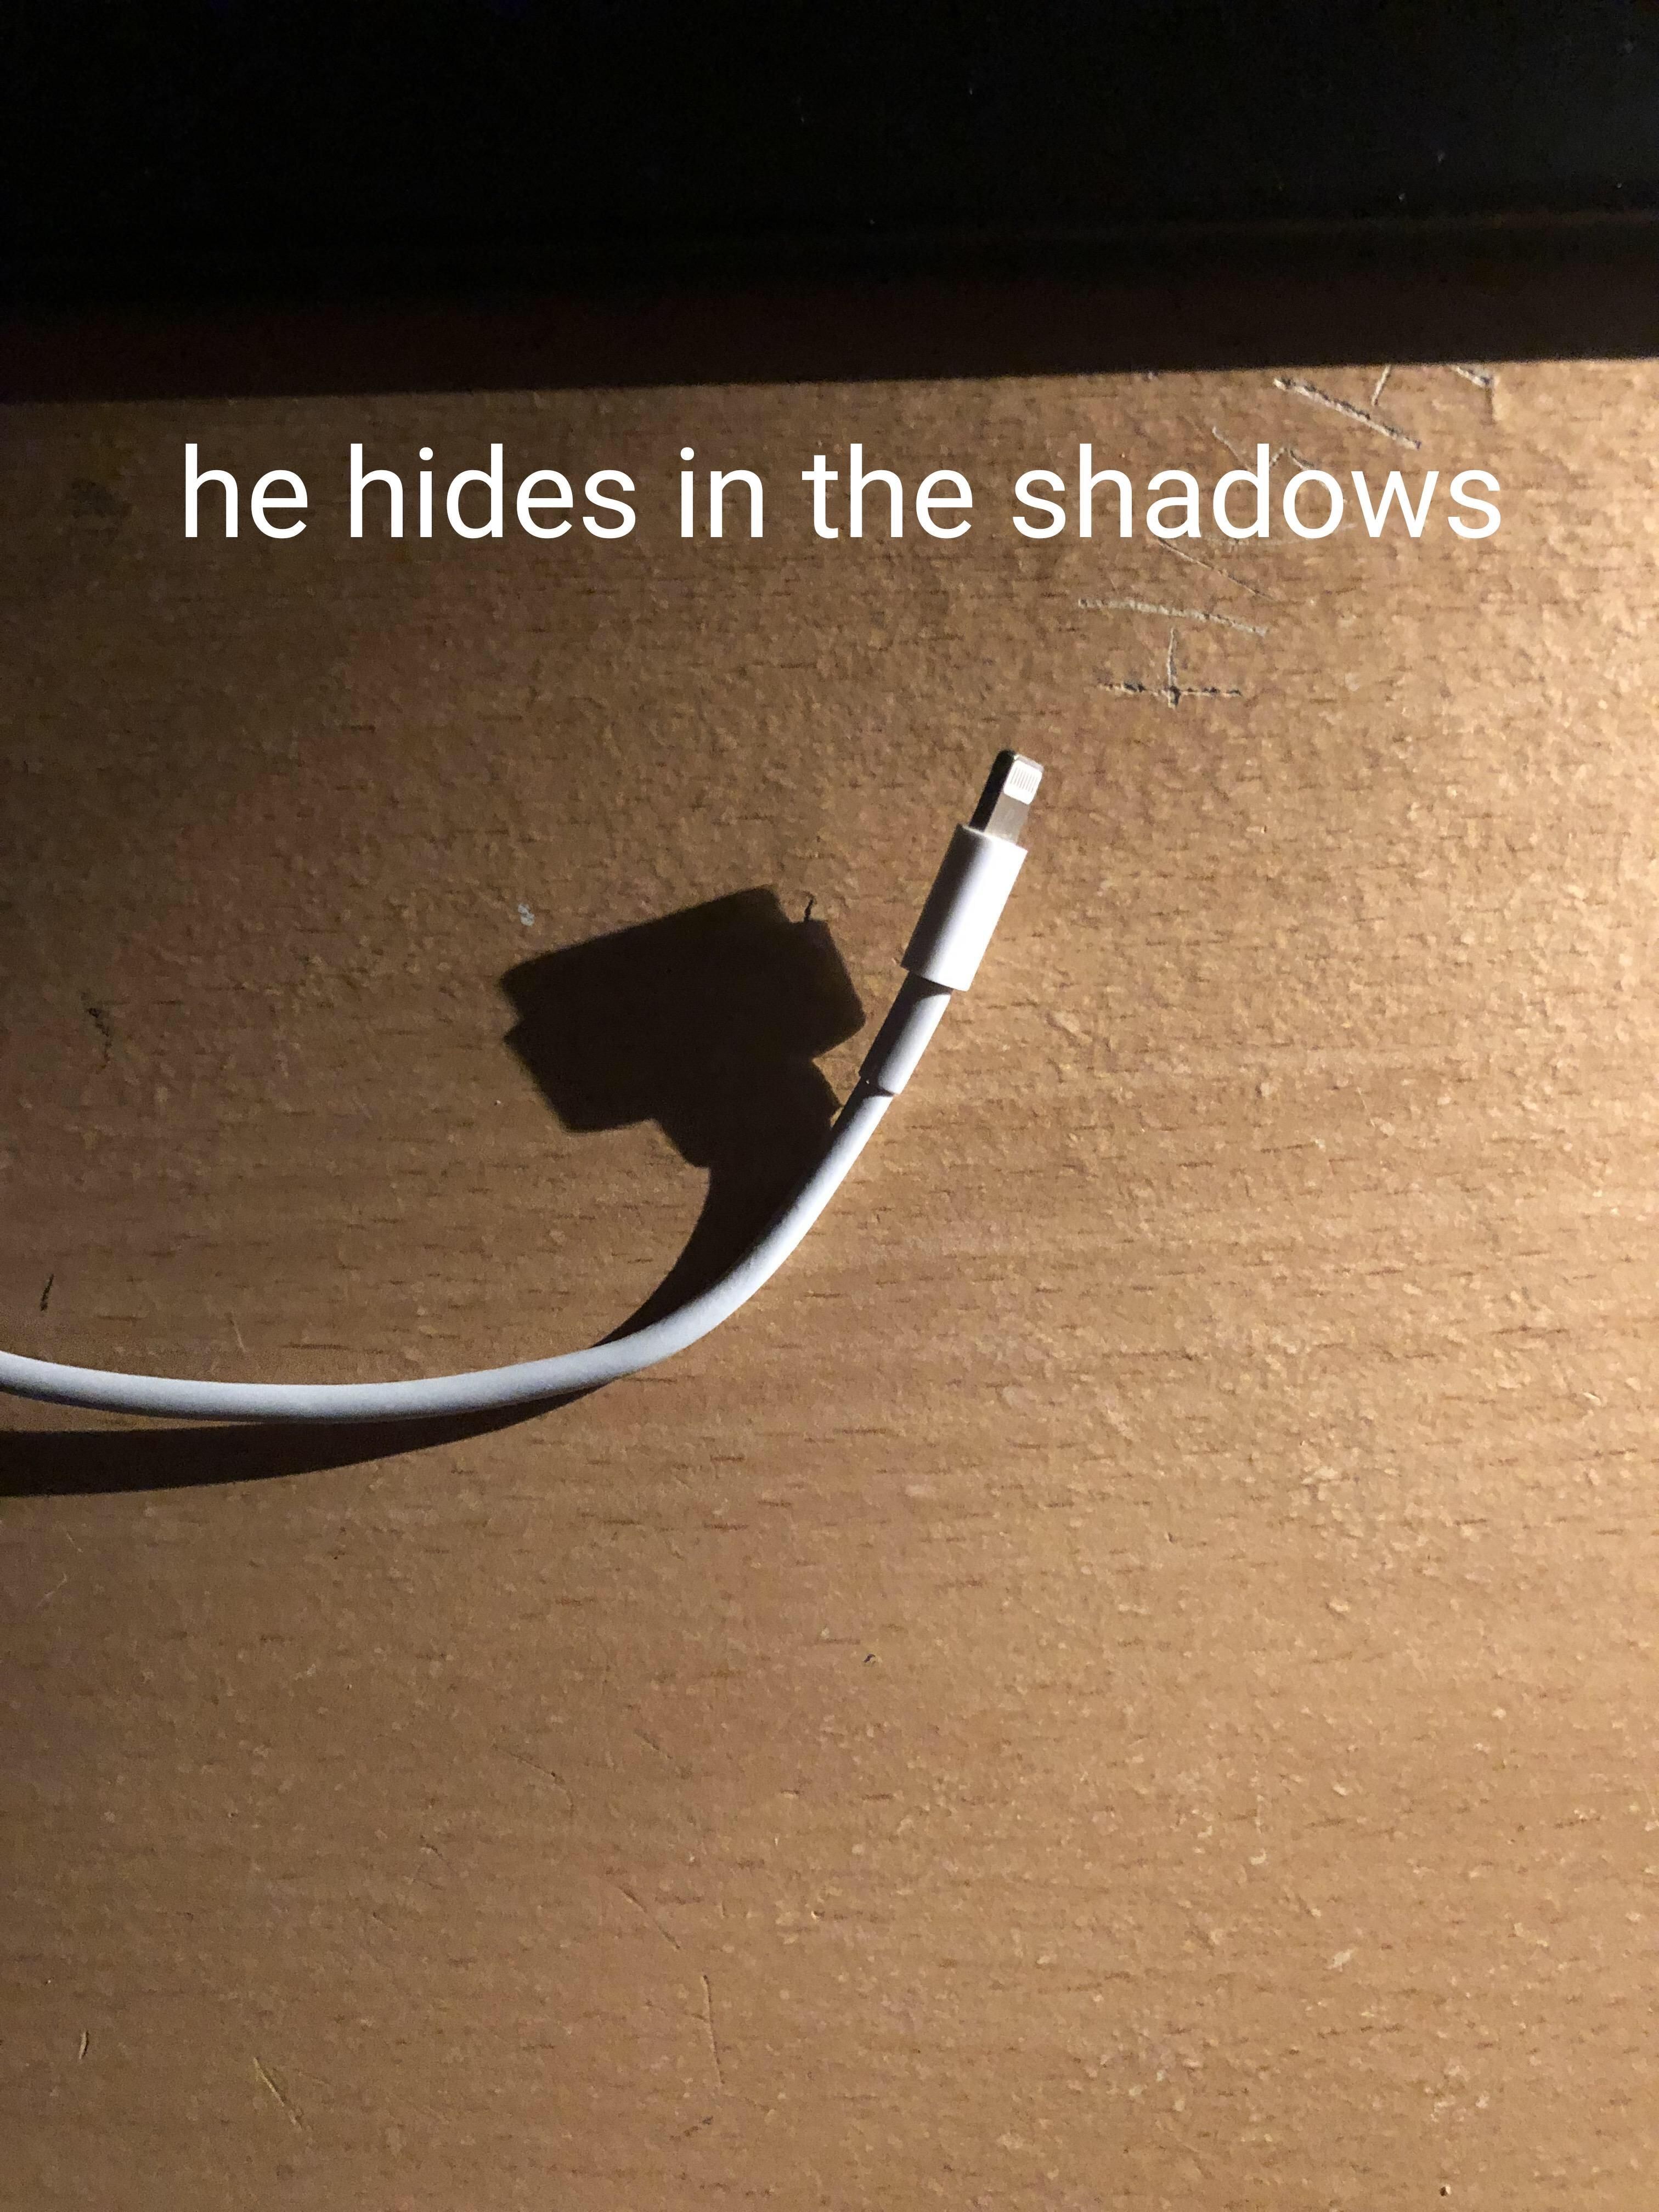 In the shadows